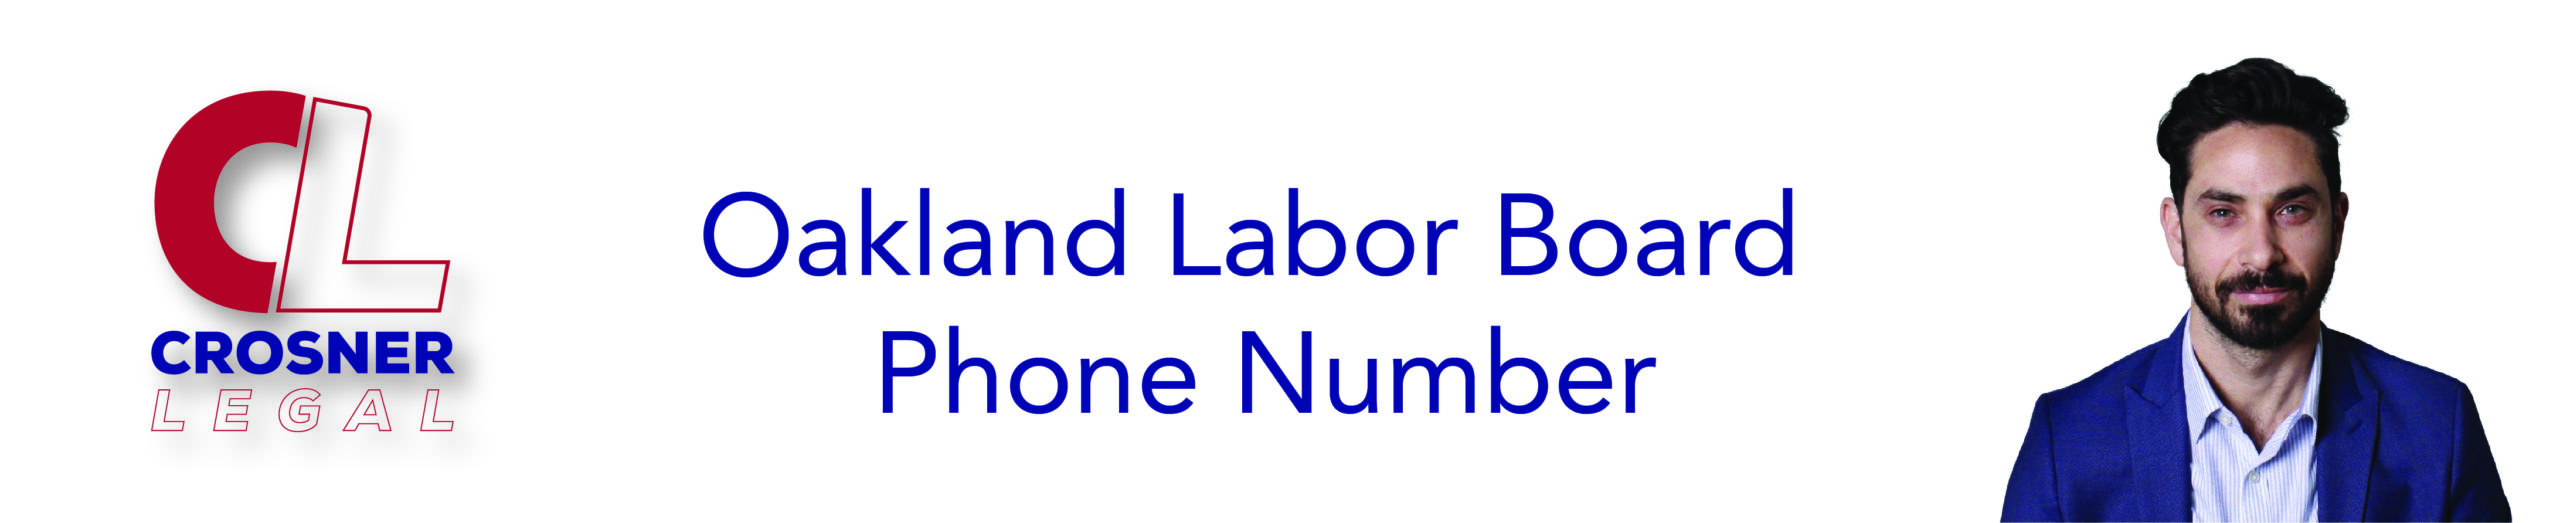 Oakland Labor Board Phone Number